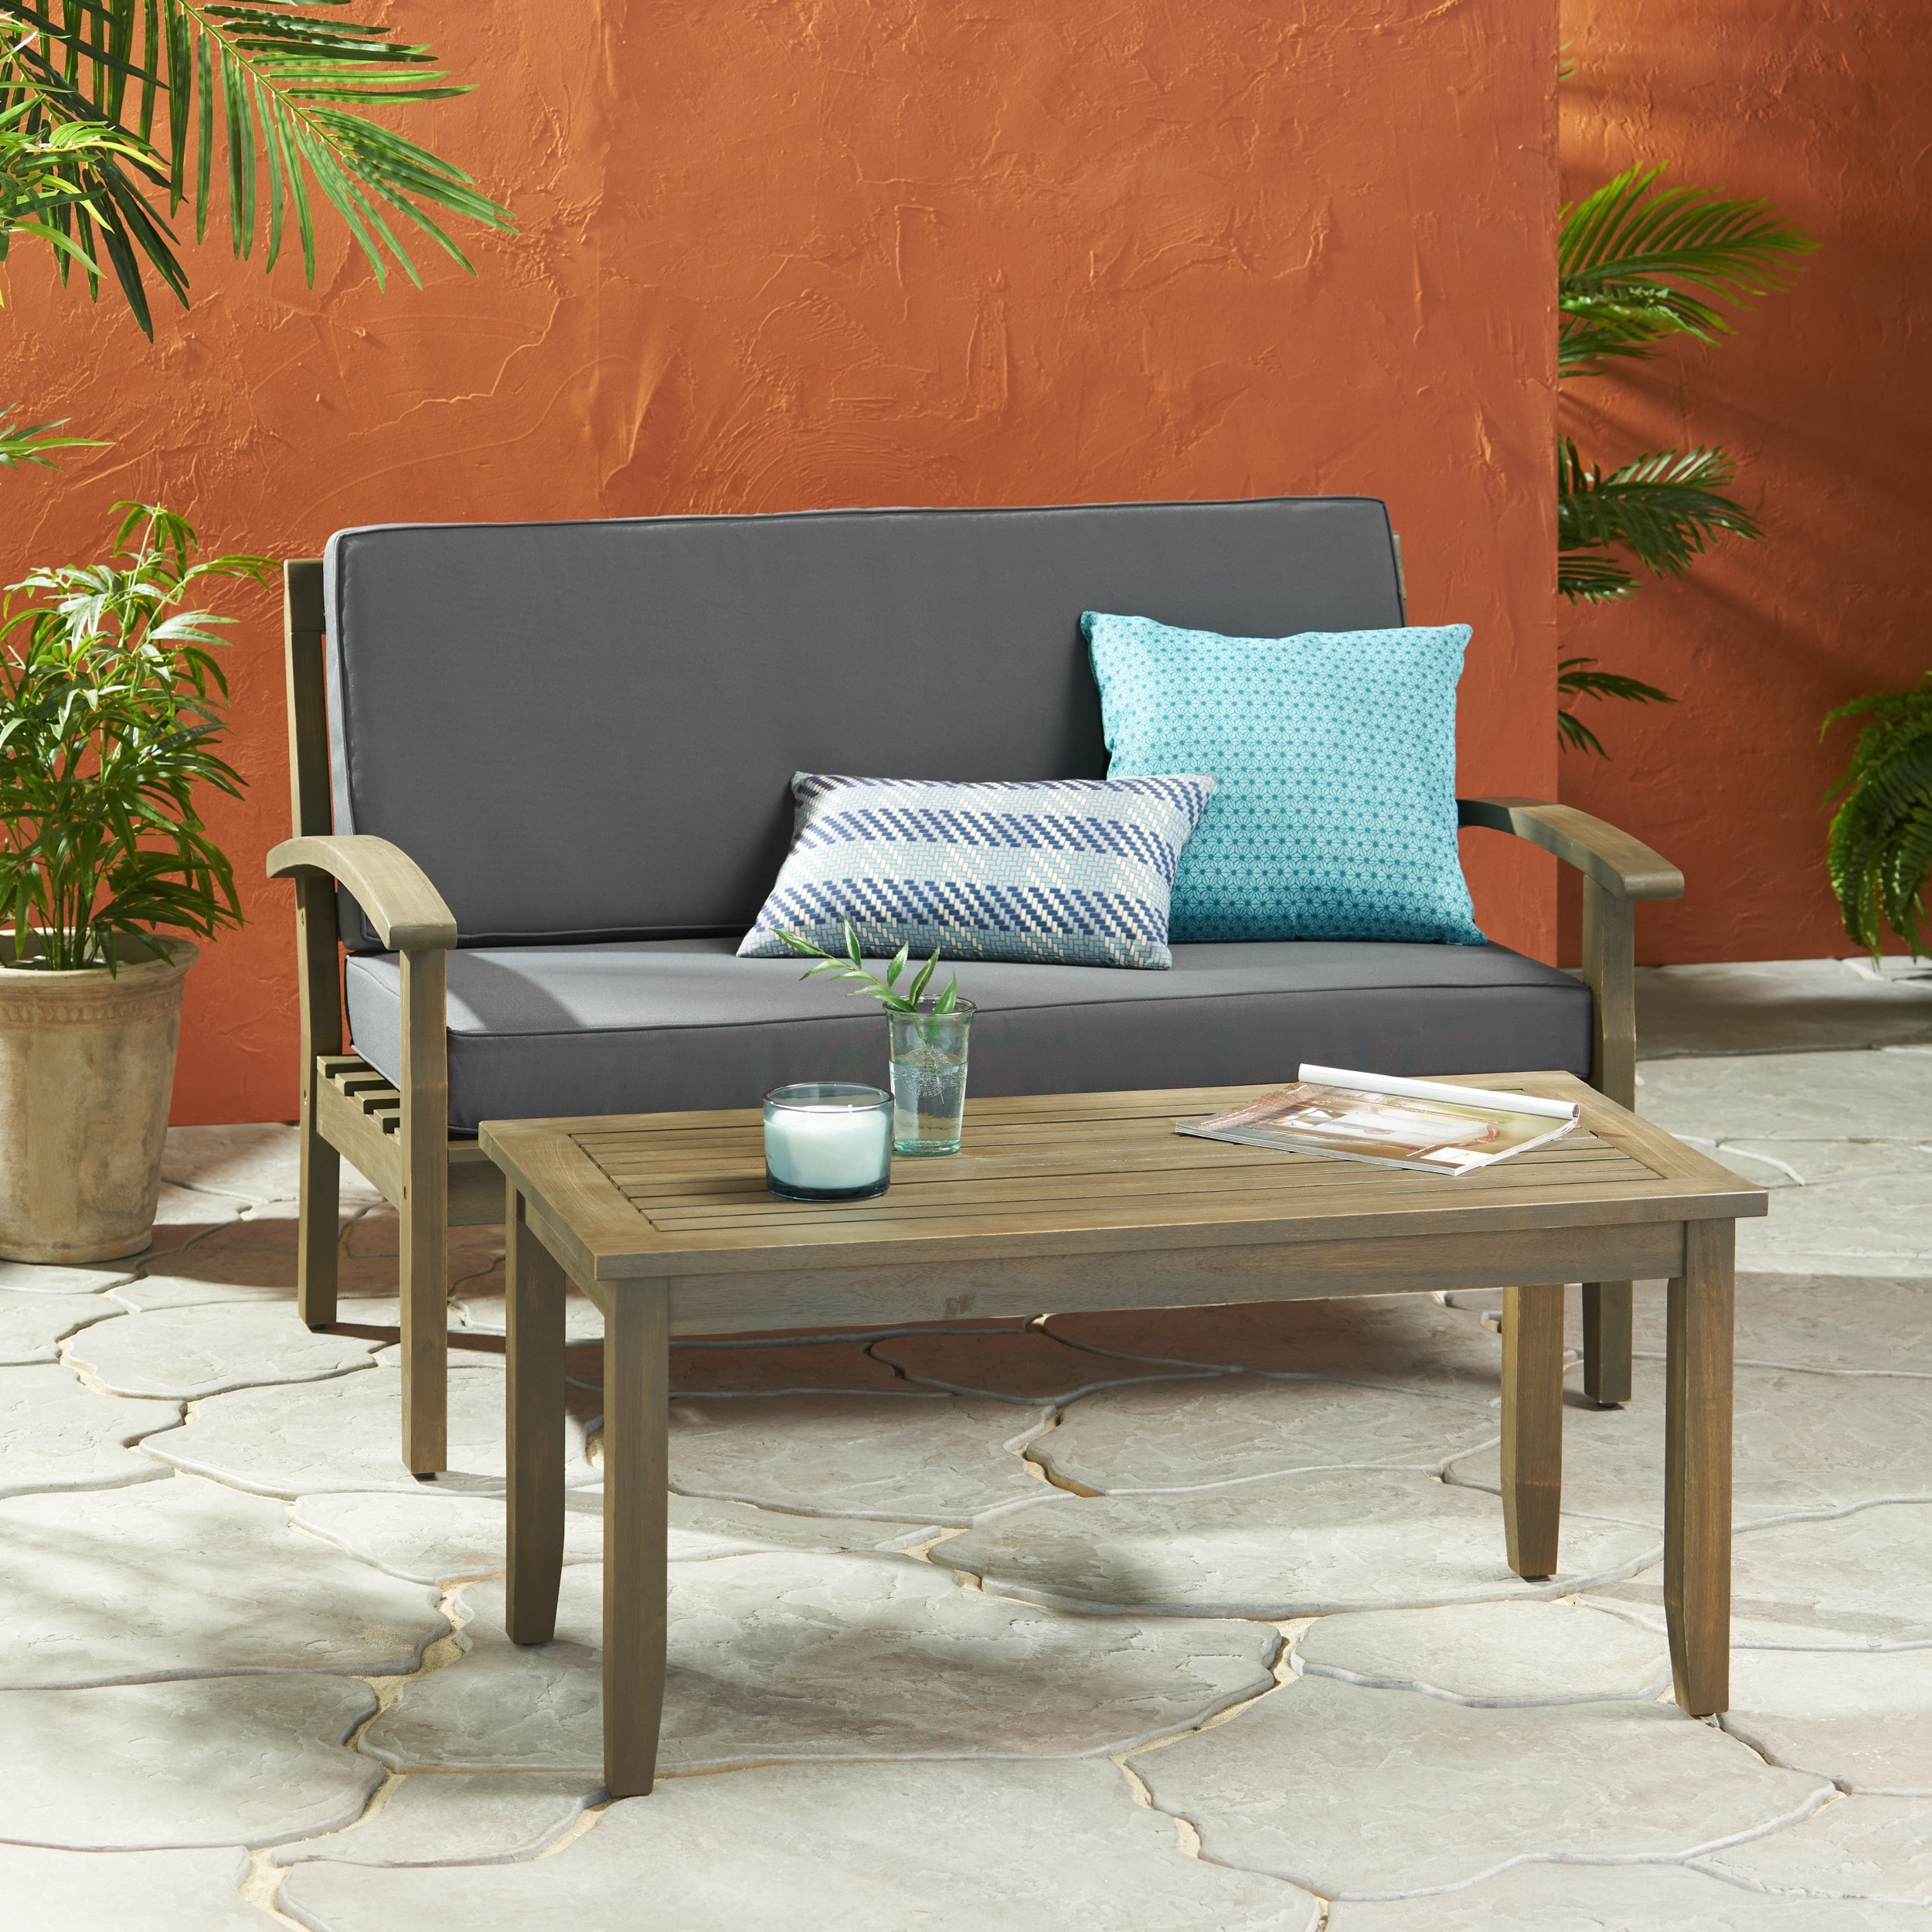 Peyton Outdoor Cushioned Acacia Wood Loveseat And Table Set By Christopher Knight Home